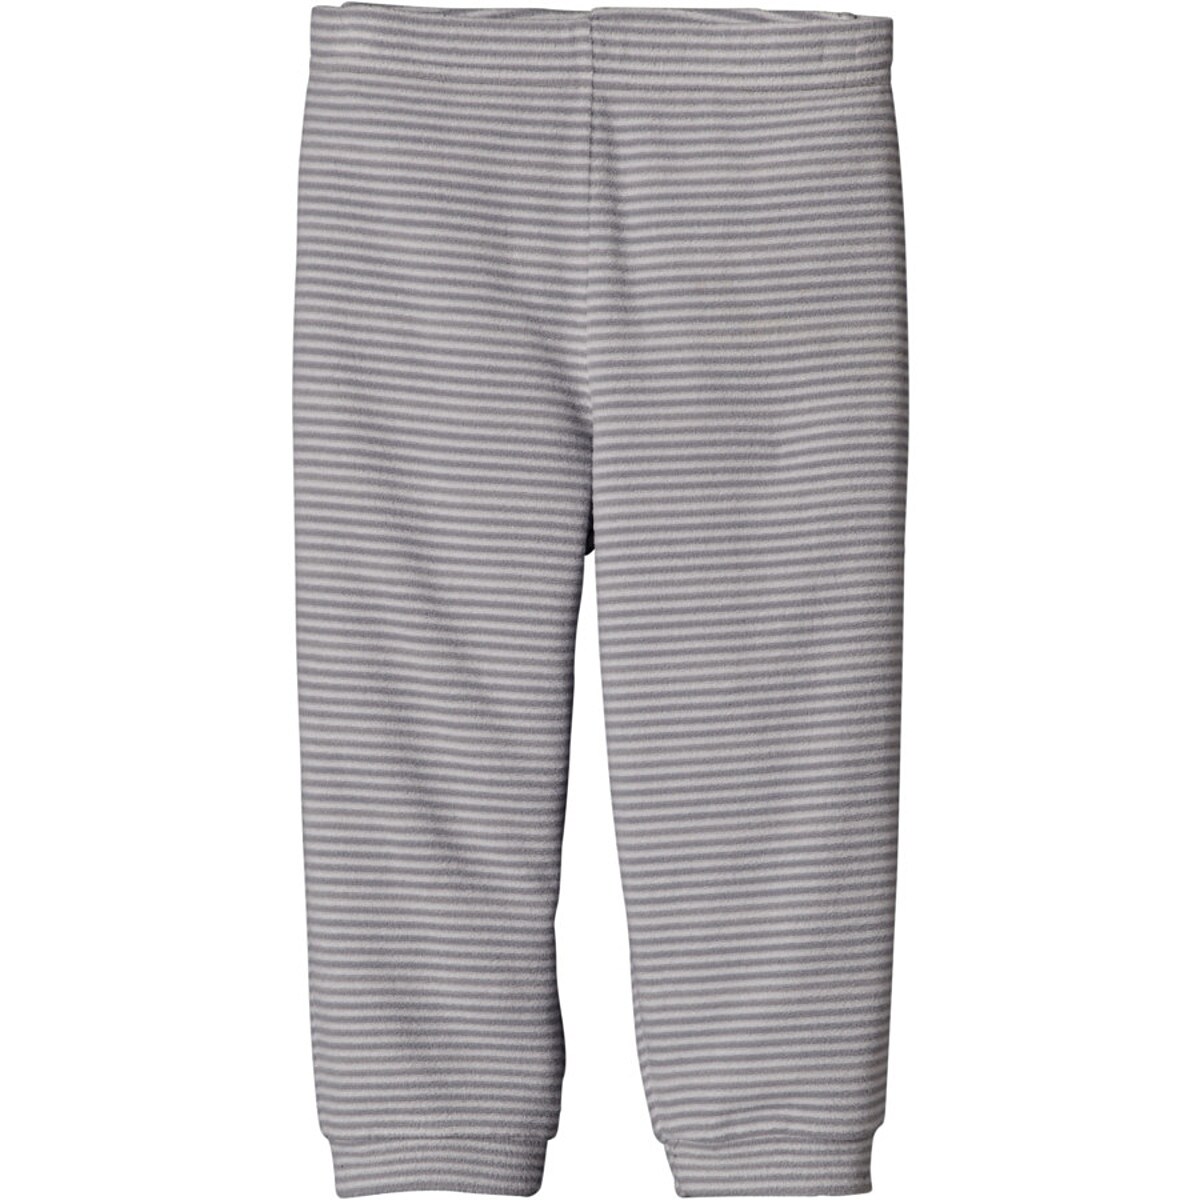 Patagonia Micro D Bottom - Toddlers' Jenny Stripe/Tailored Grey